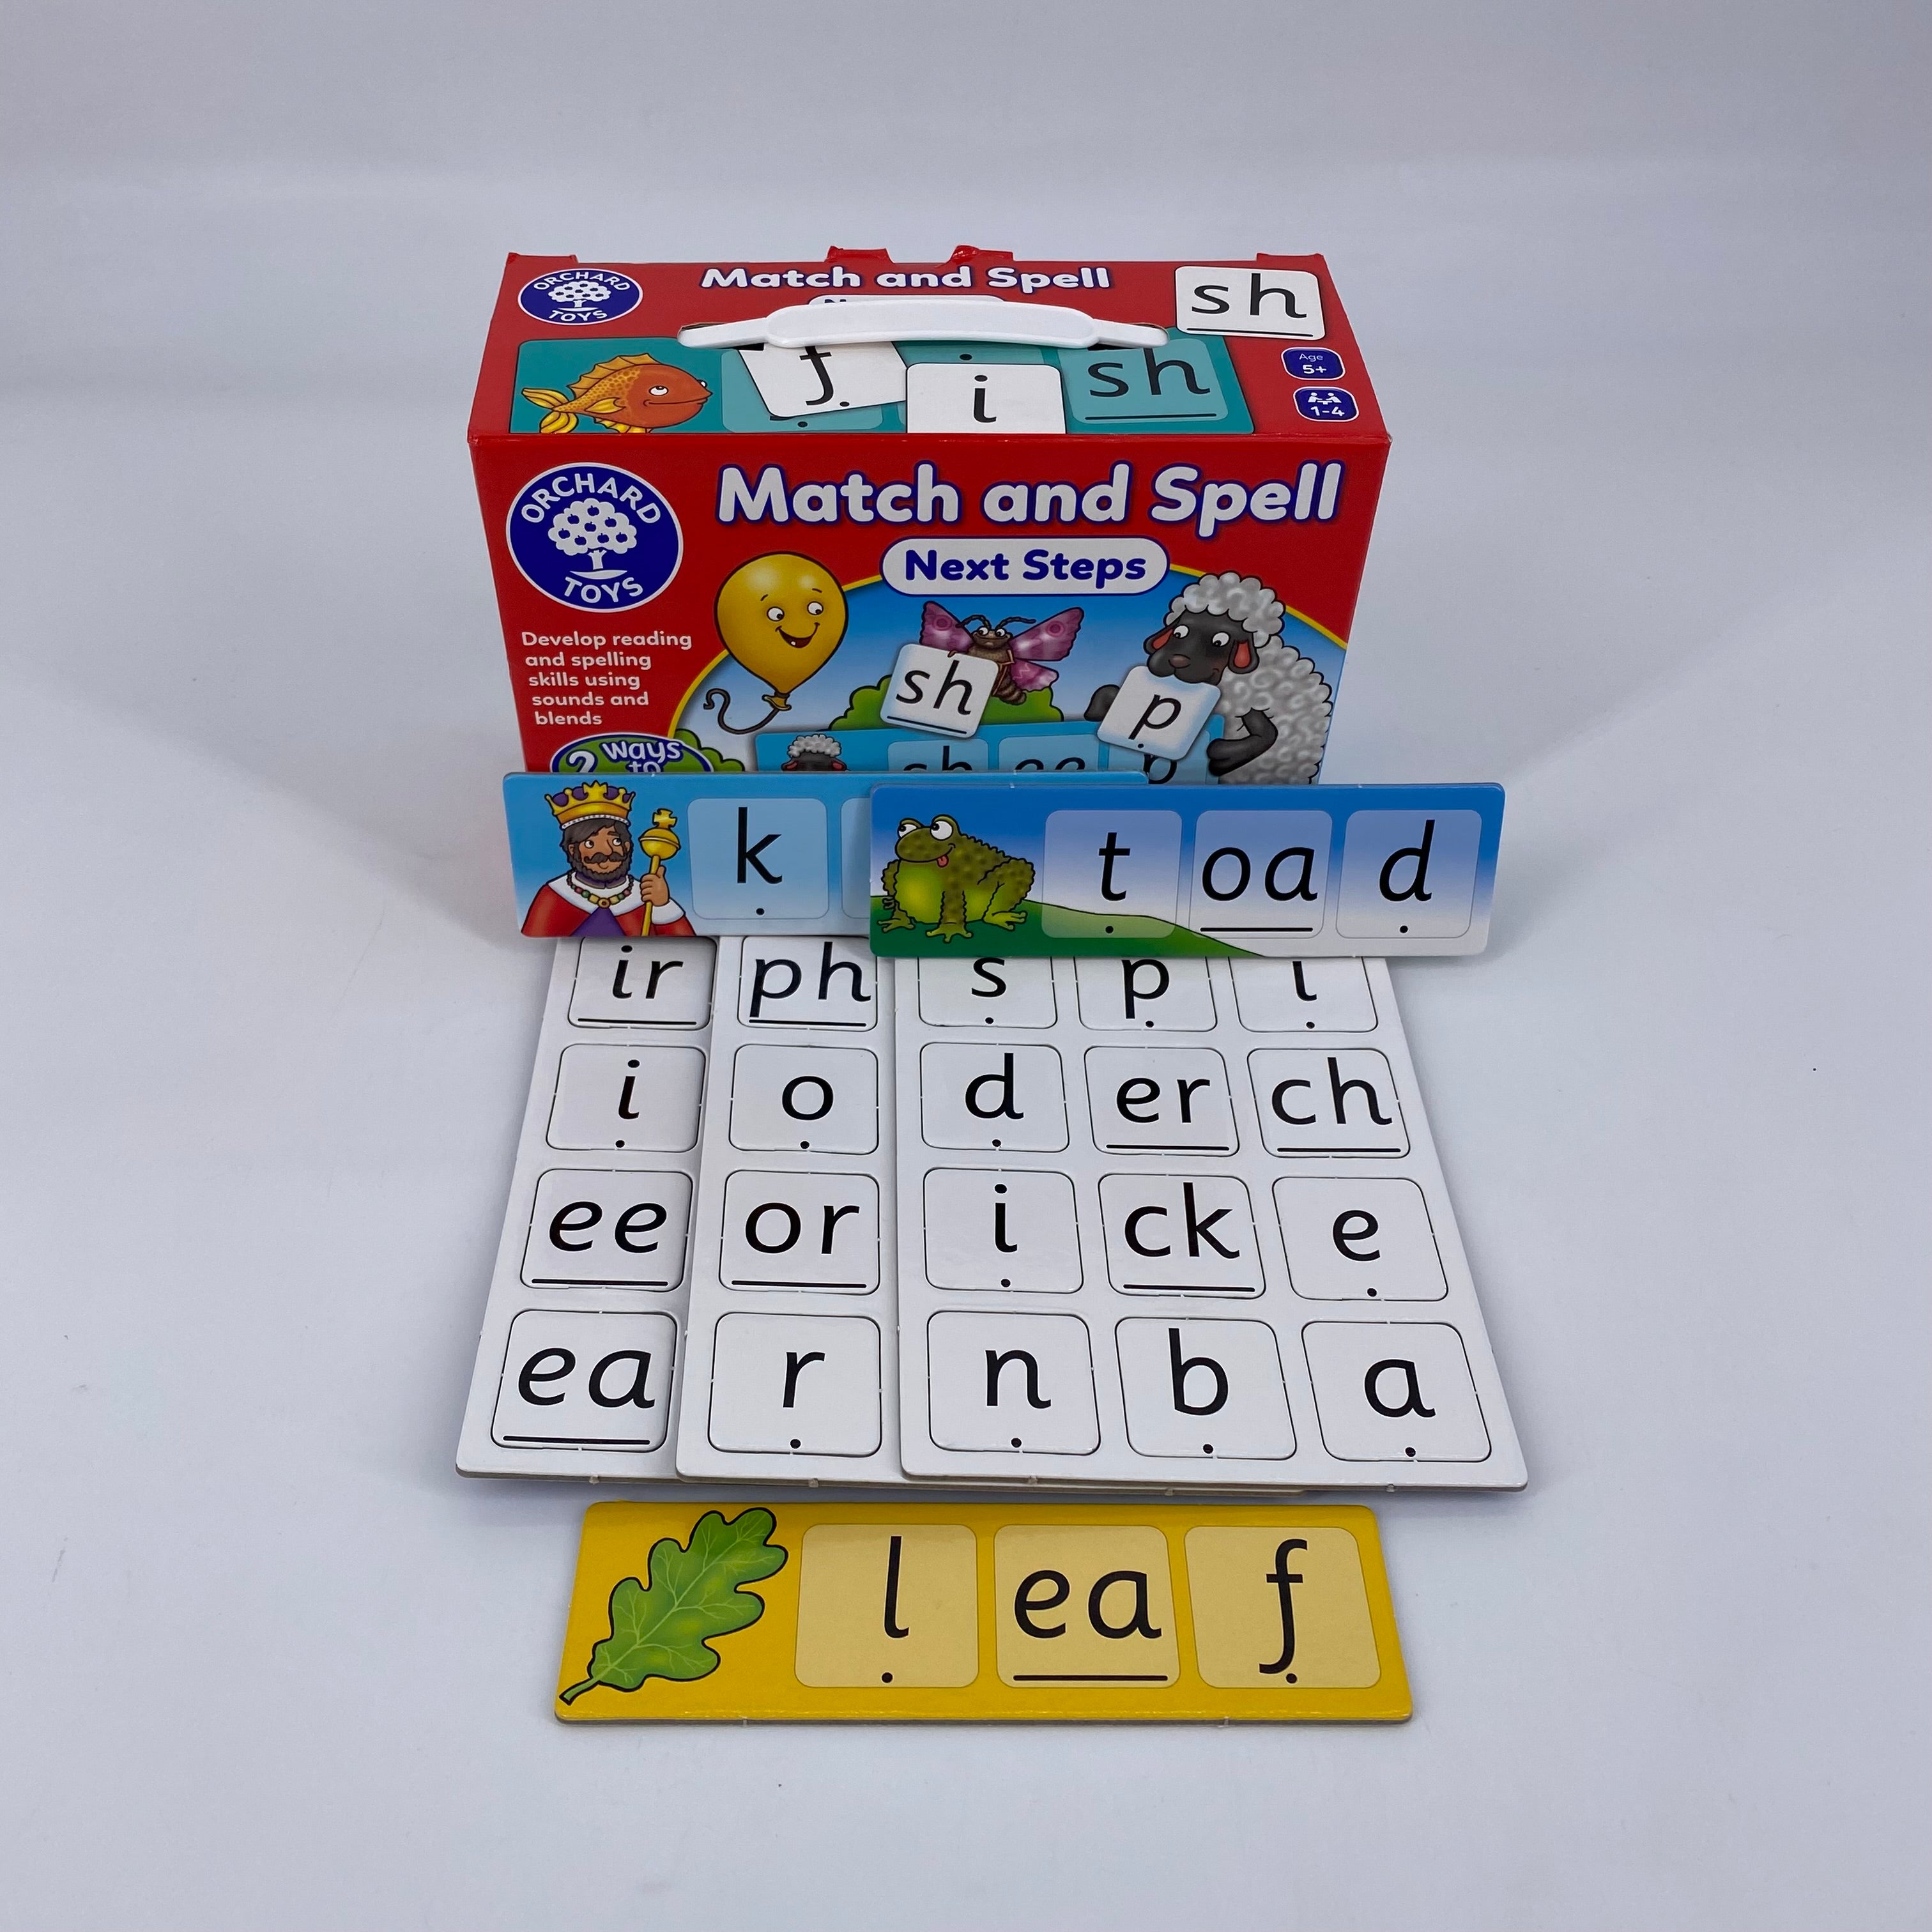 Match and spell - Next steps